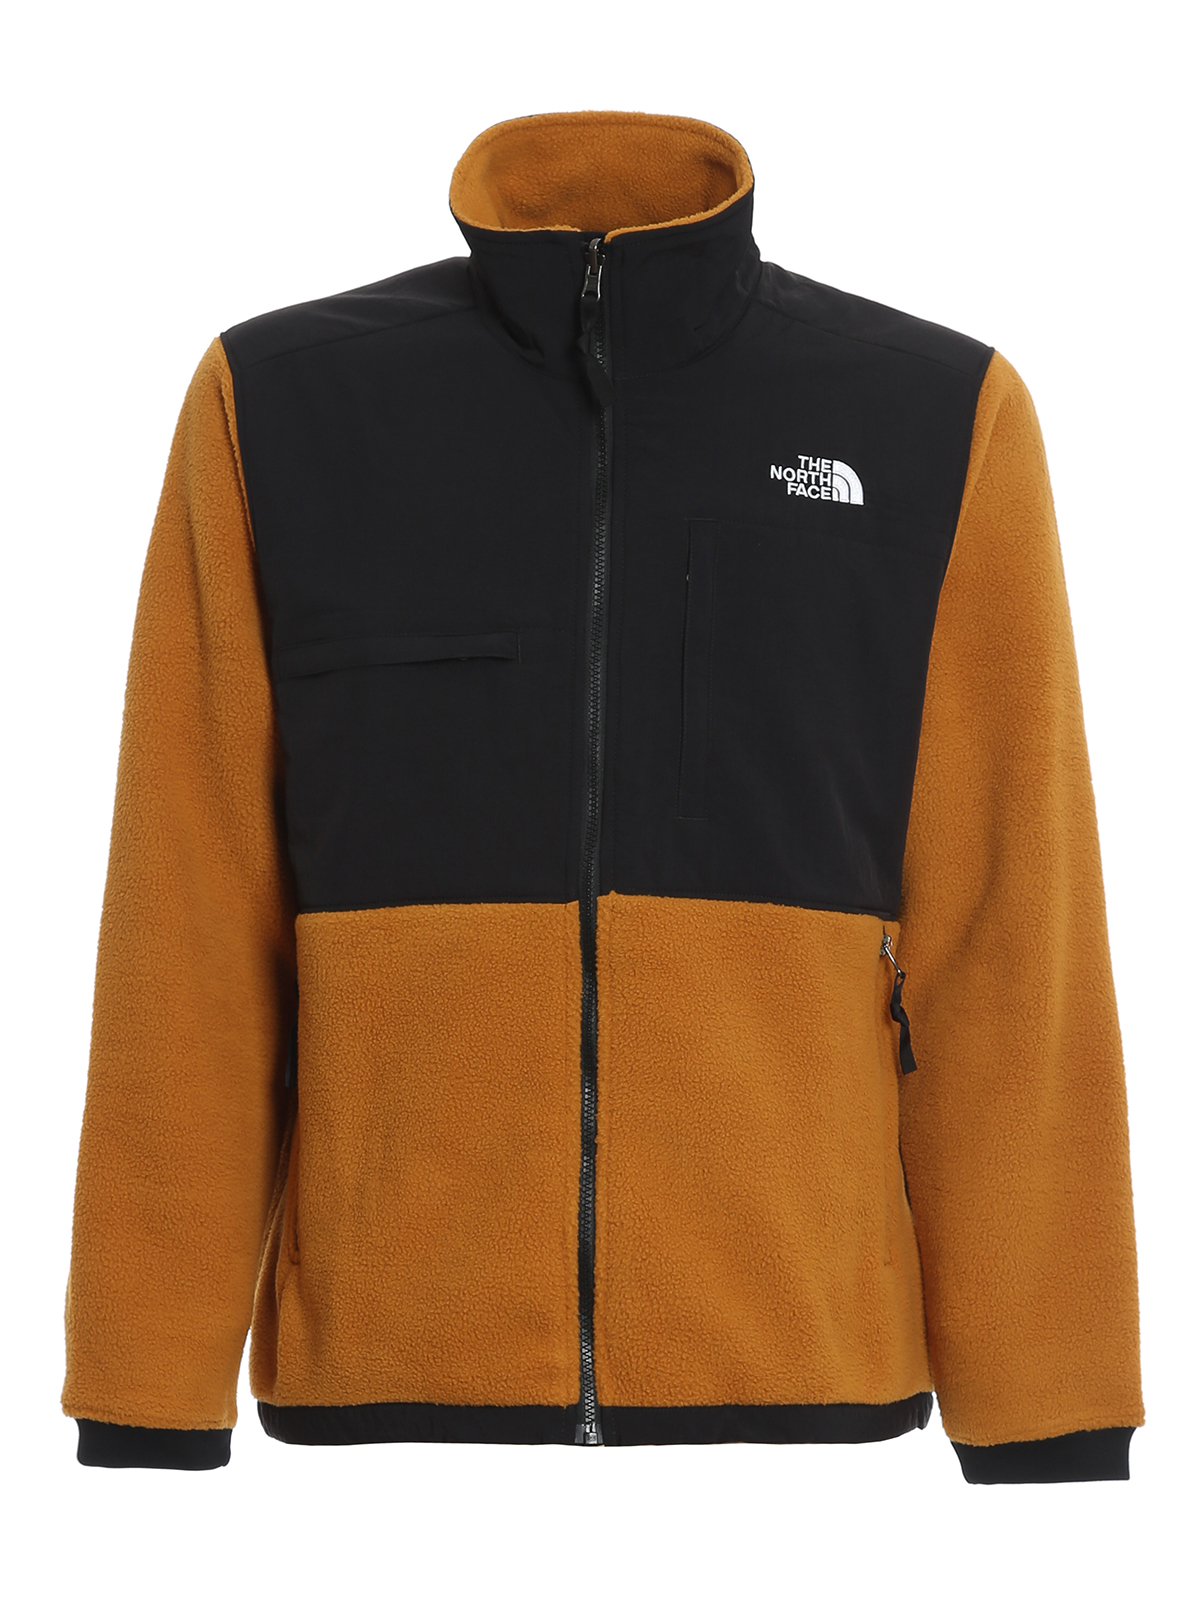 north face jacket with front pocket